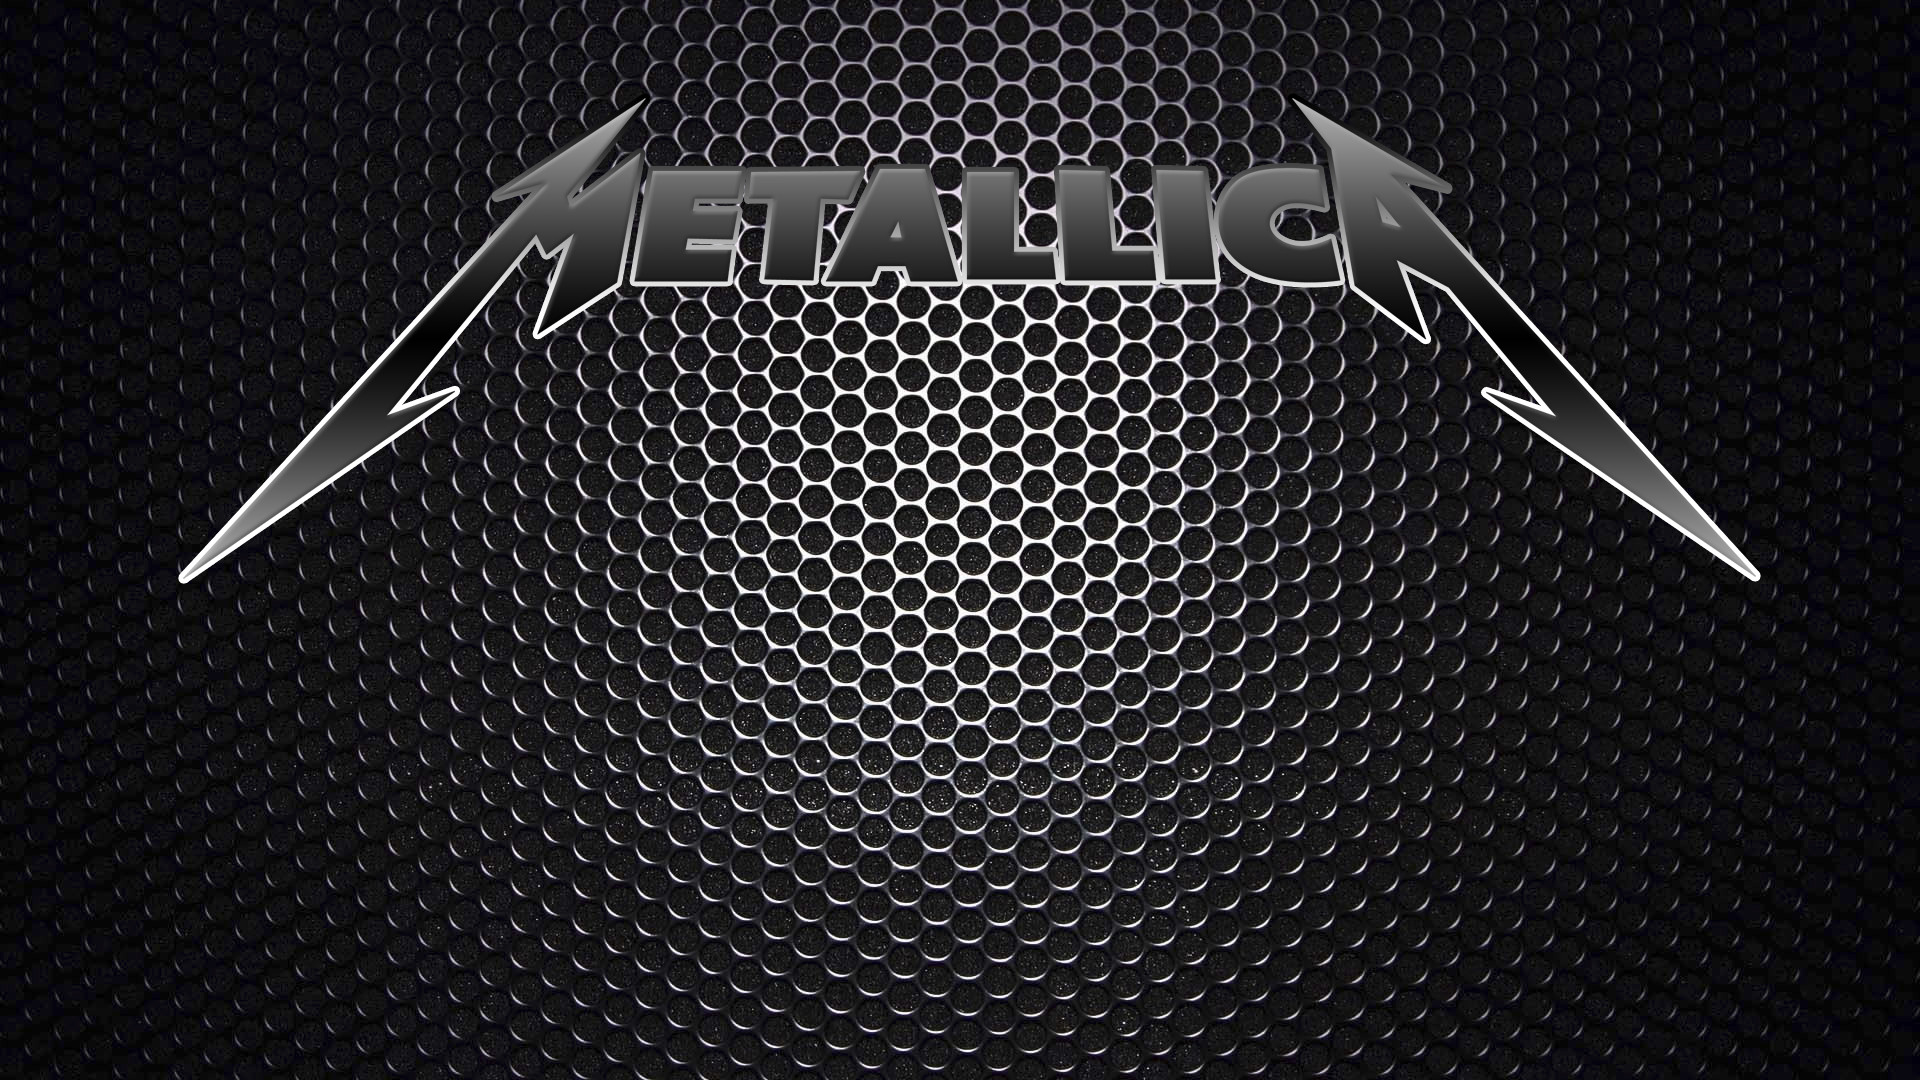 0 Metallica Hd Wallpapers And Backgrounds Metallica - Metallica Logo - HD Wallpaper 